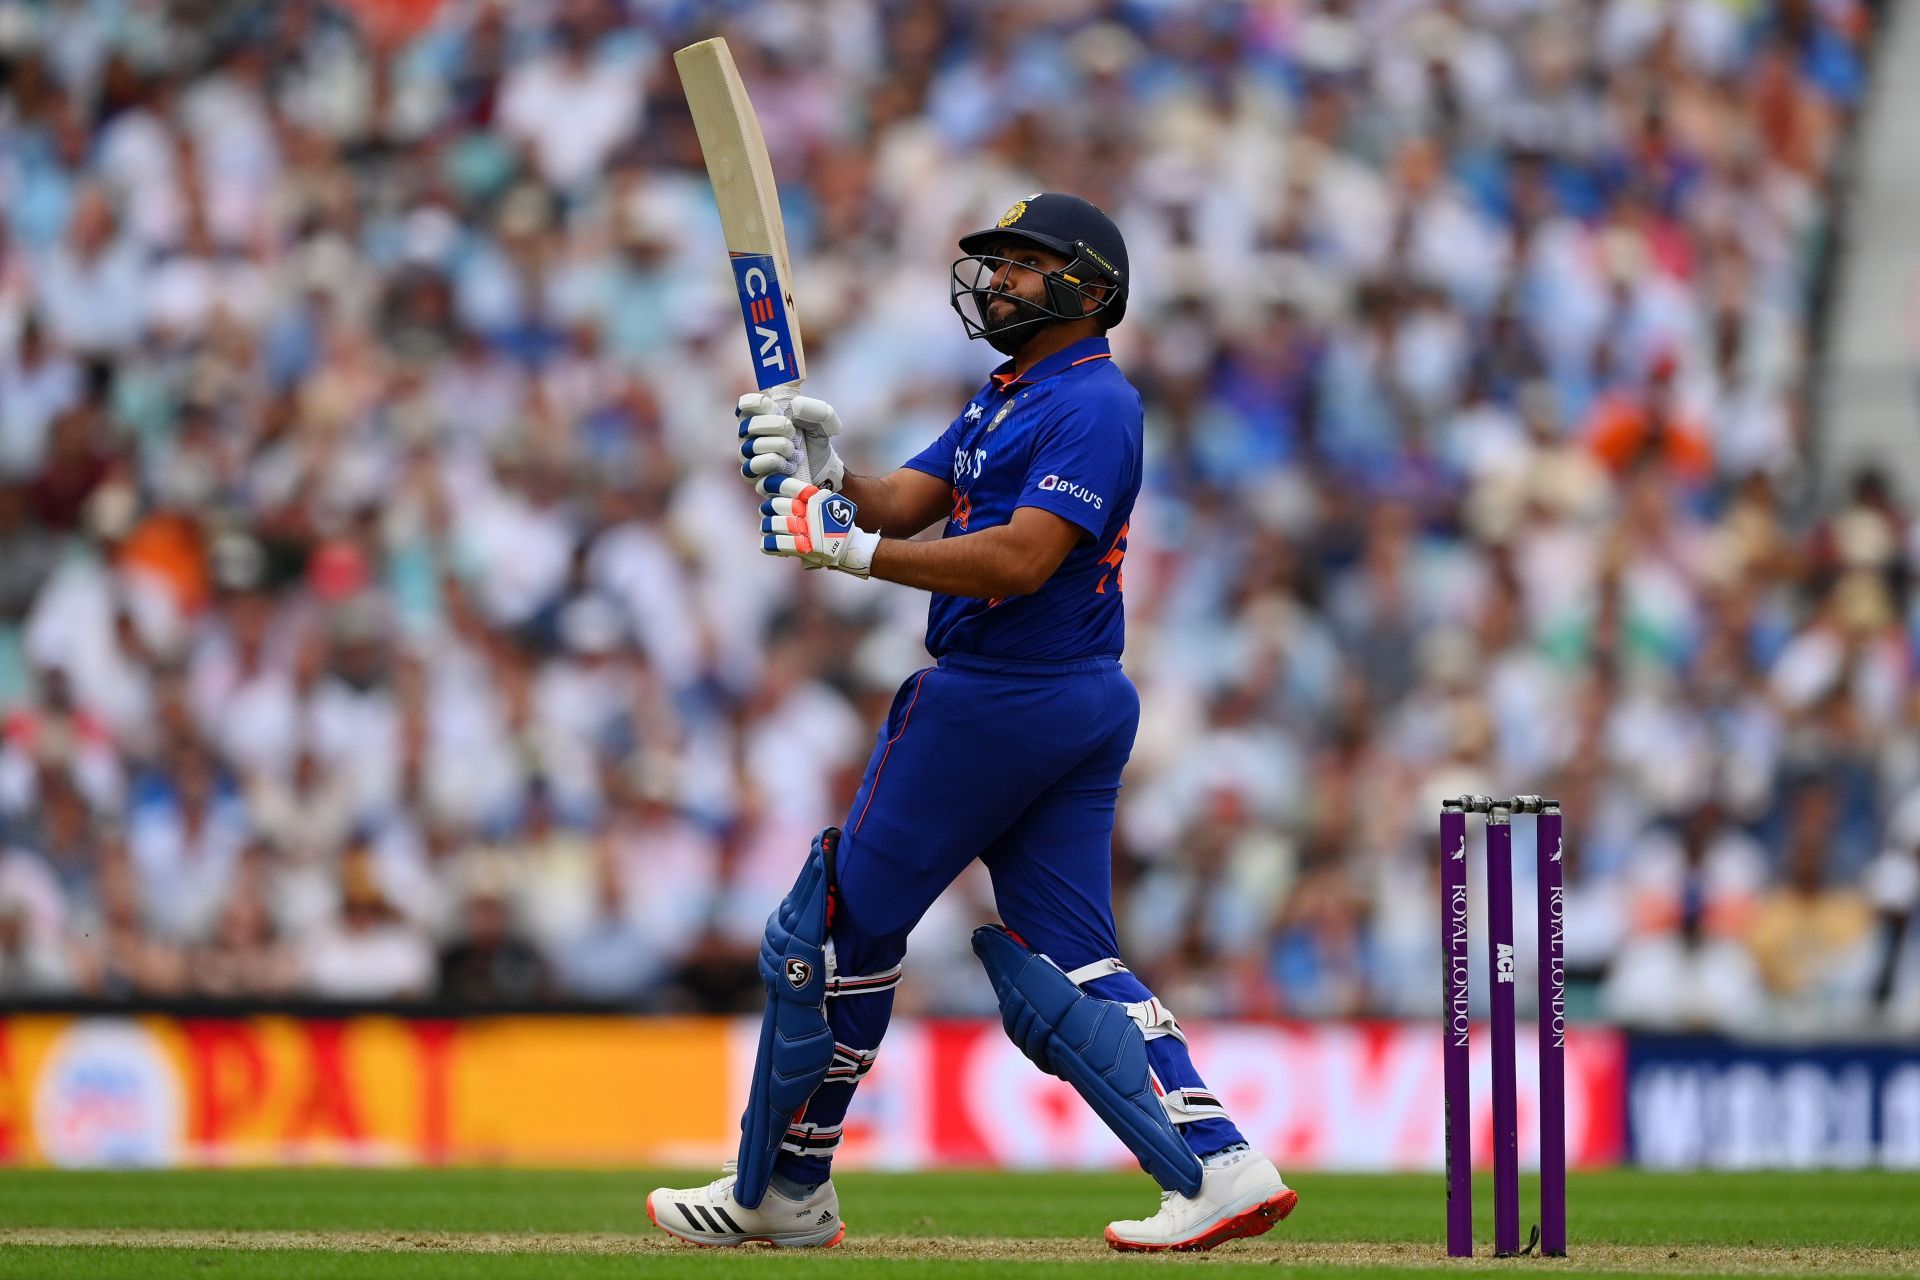 Rohit Sharma smashed a blazing 76* against England on Tuesday (Image Courtesy: Getty Images)